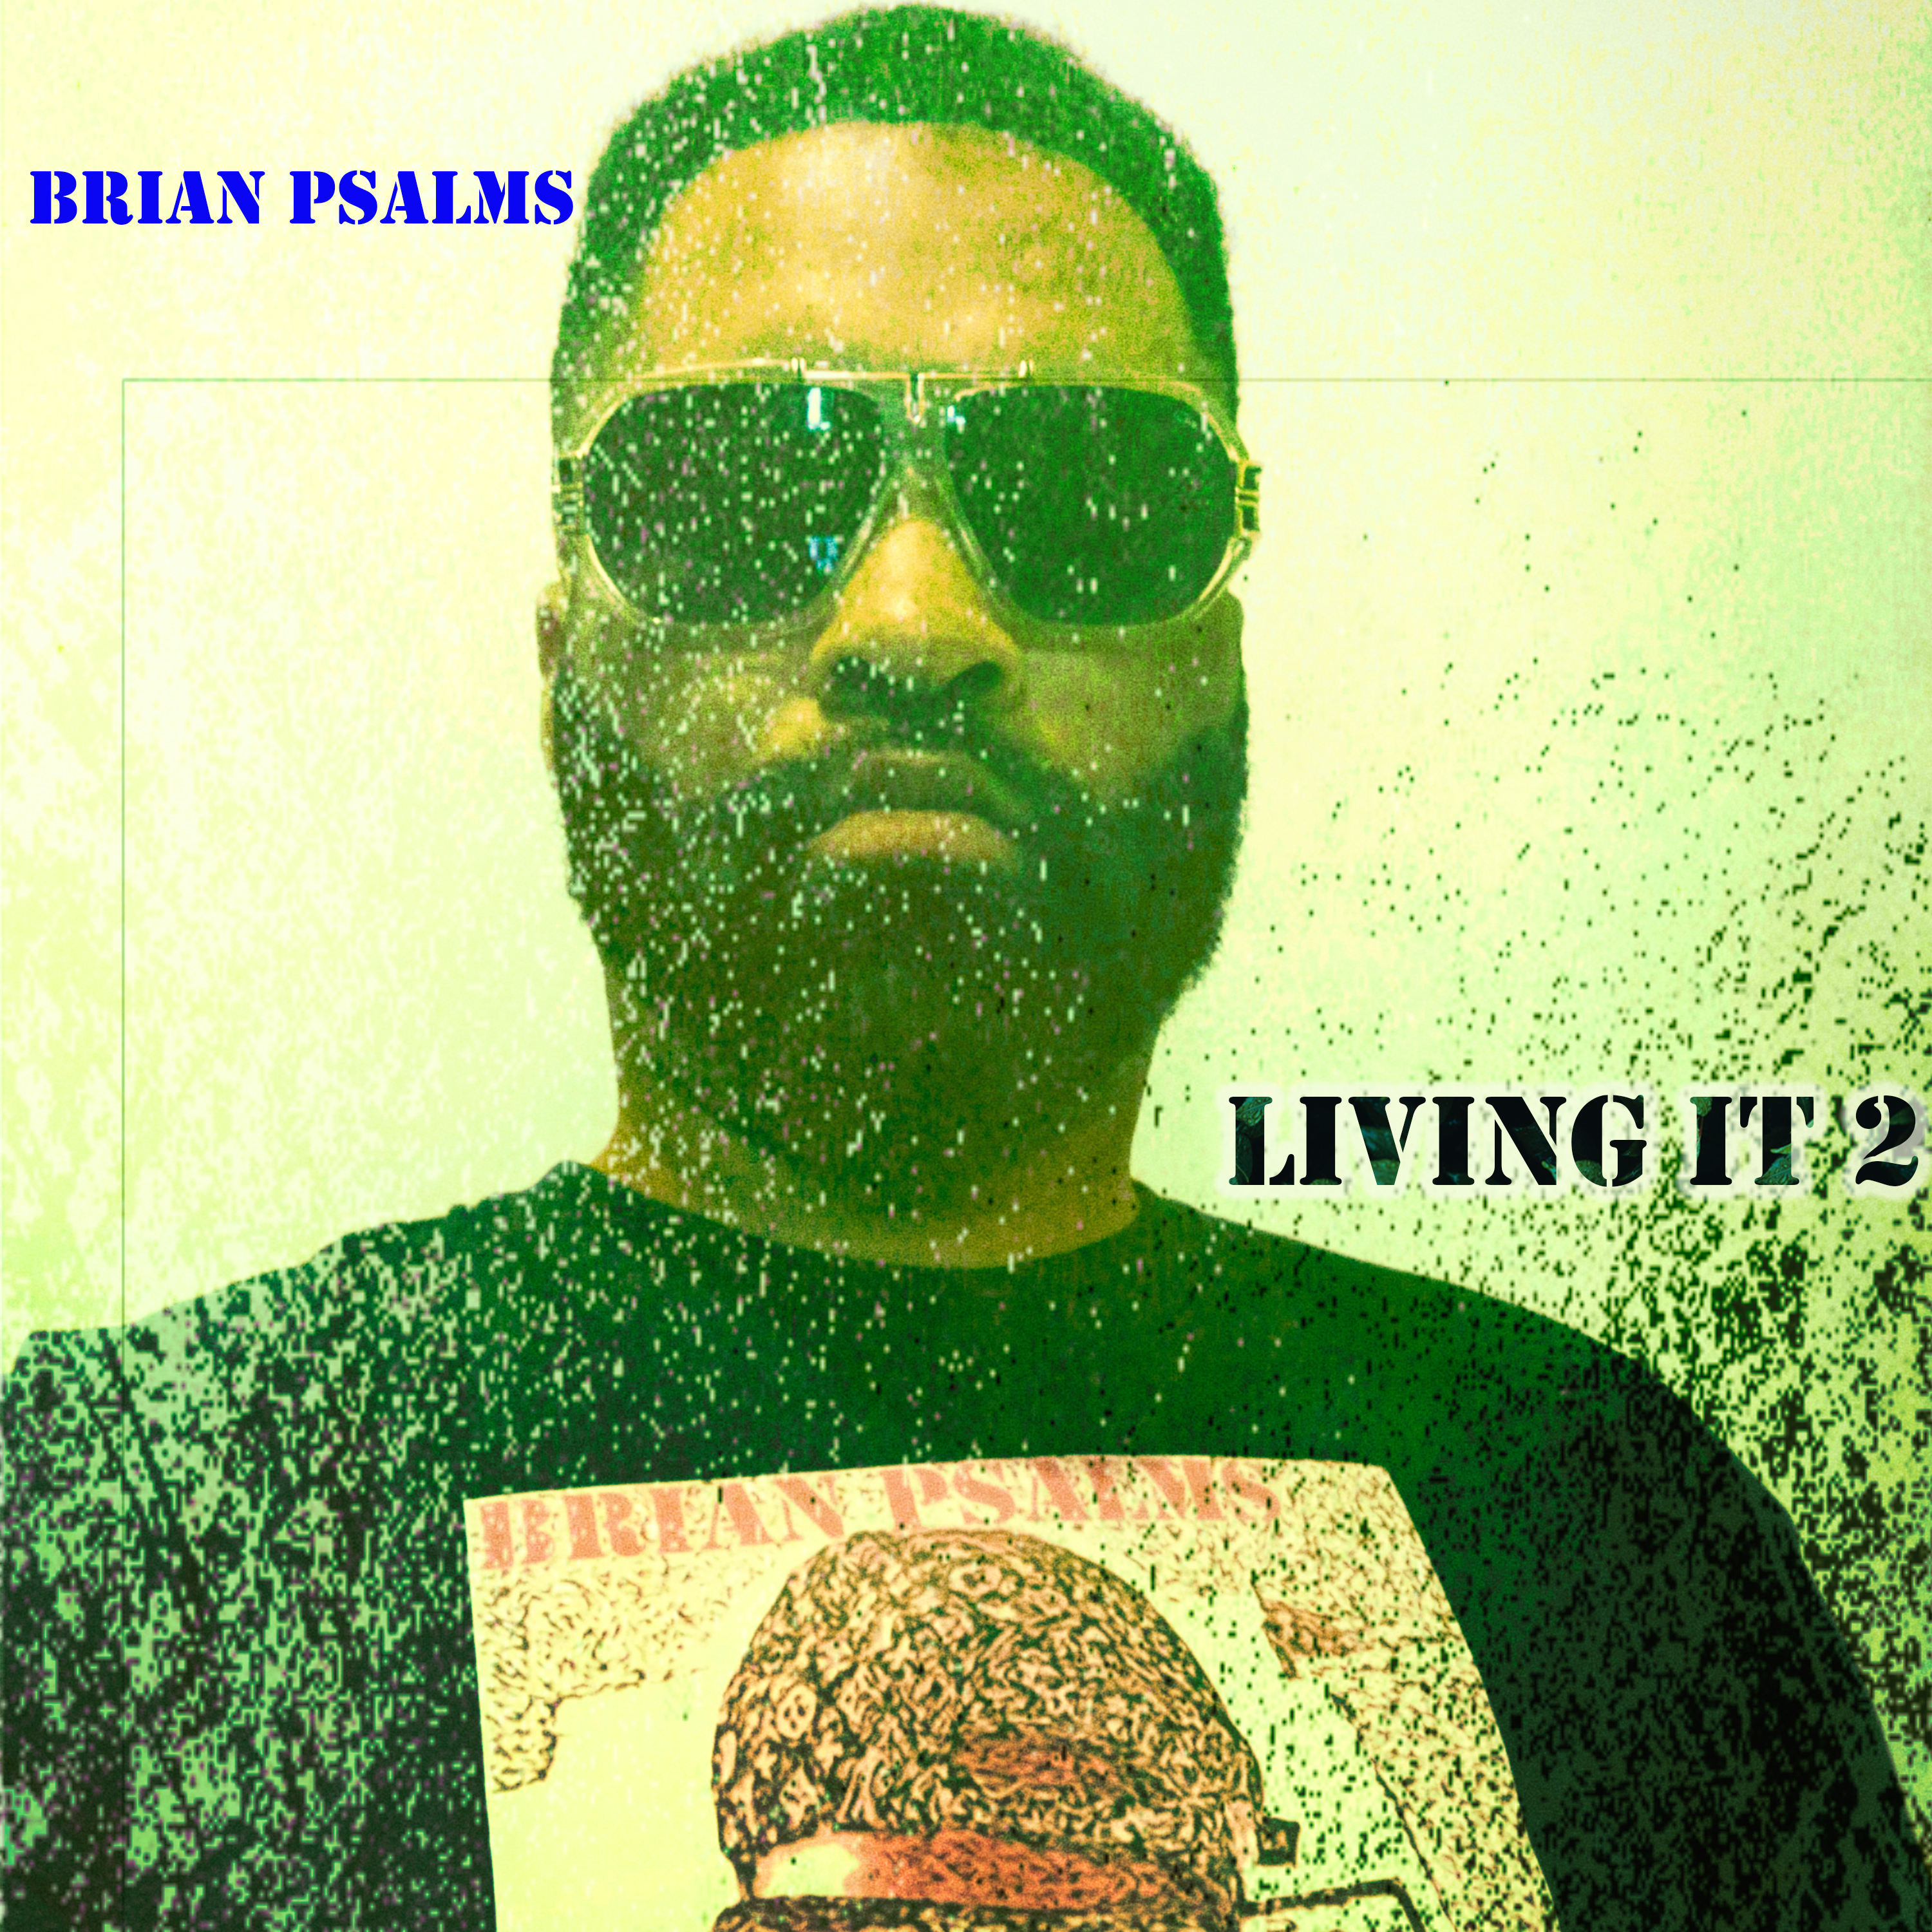 Art for Living It 2 by Brian Psalms